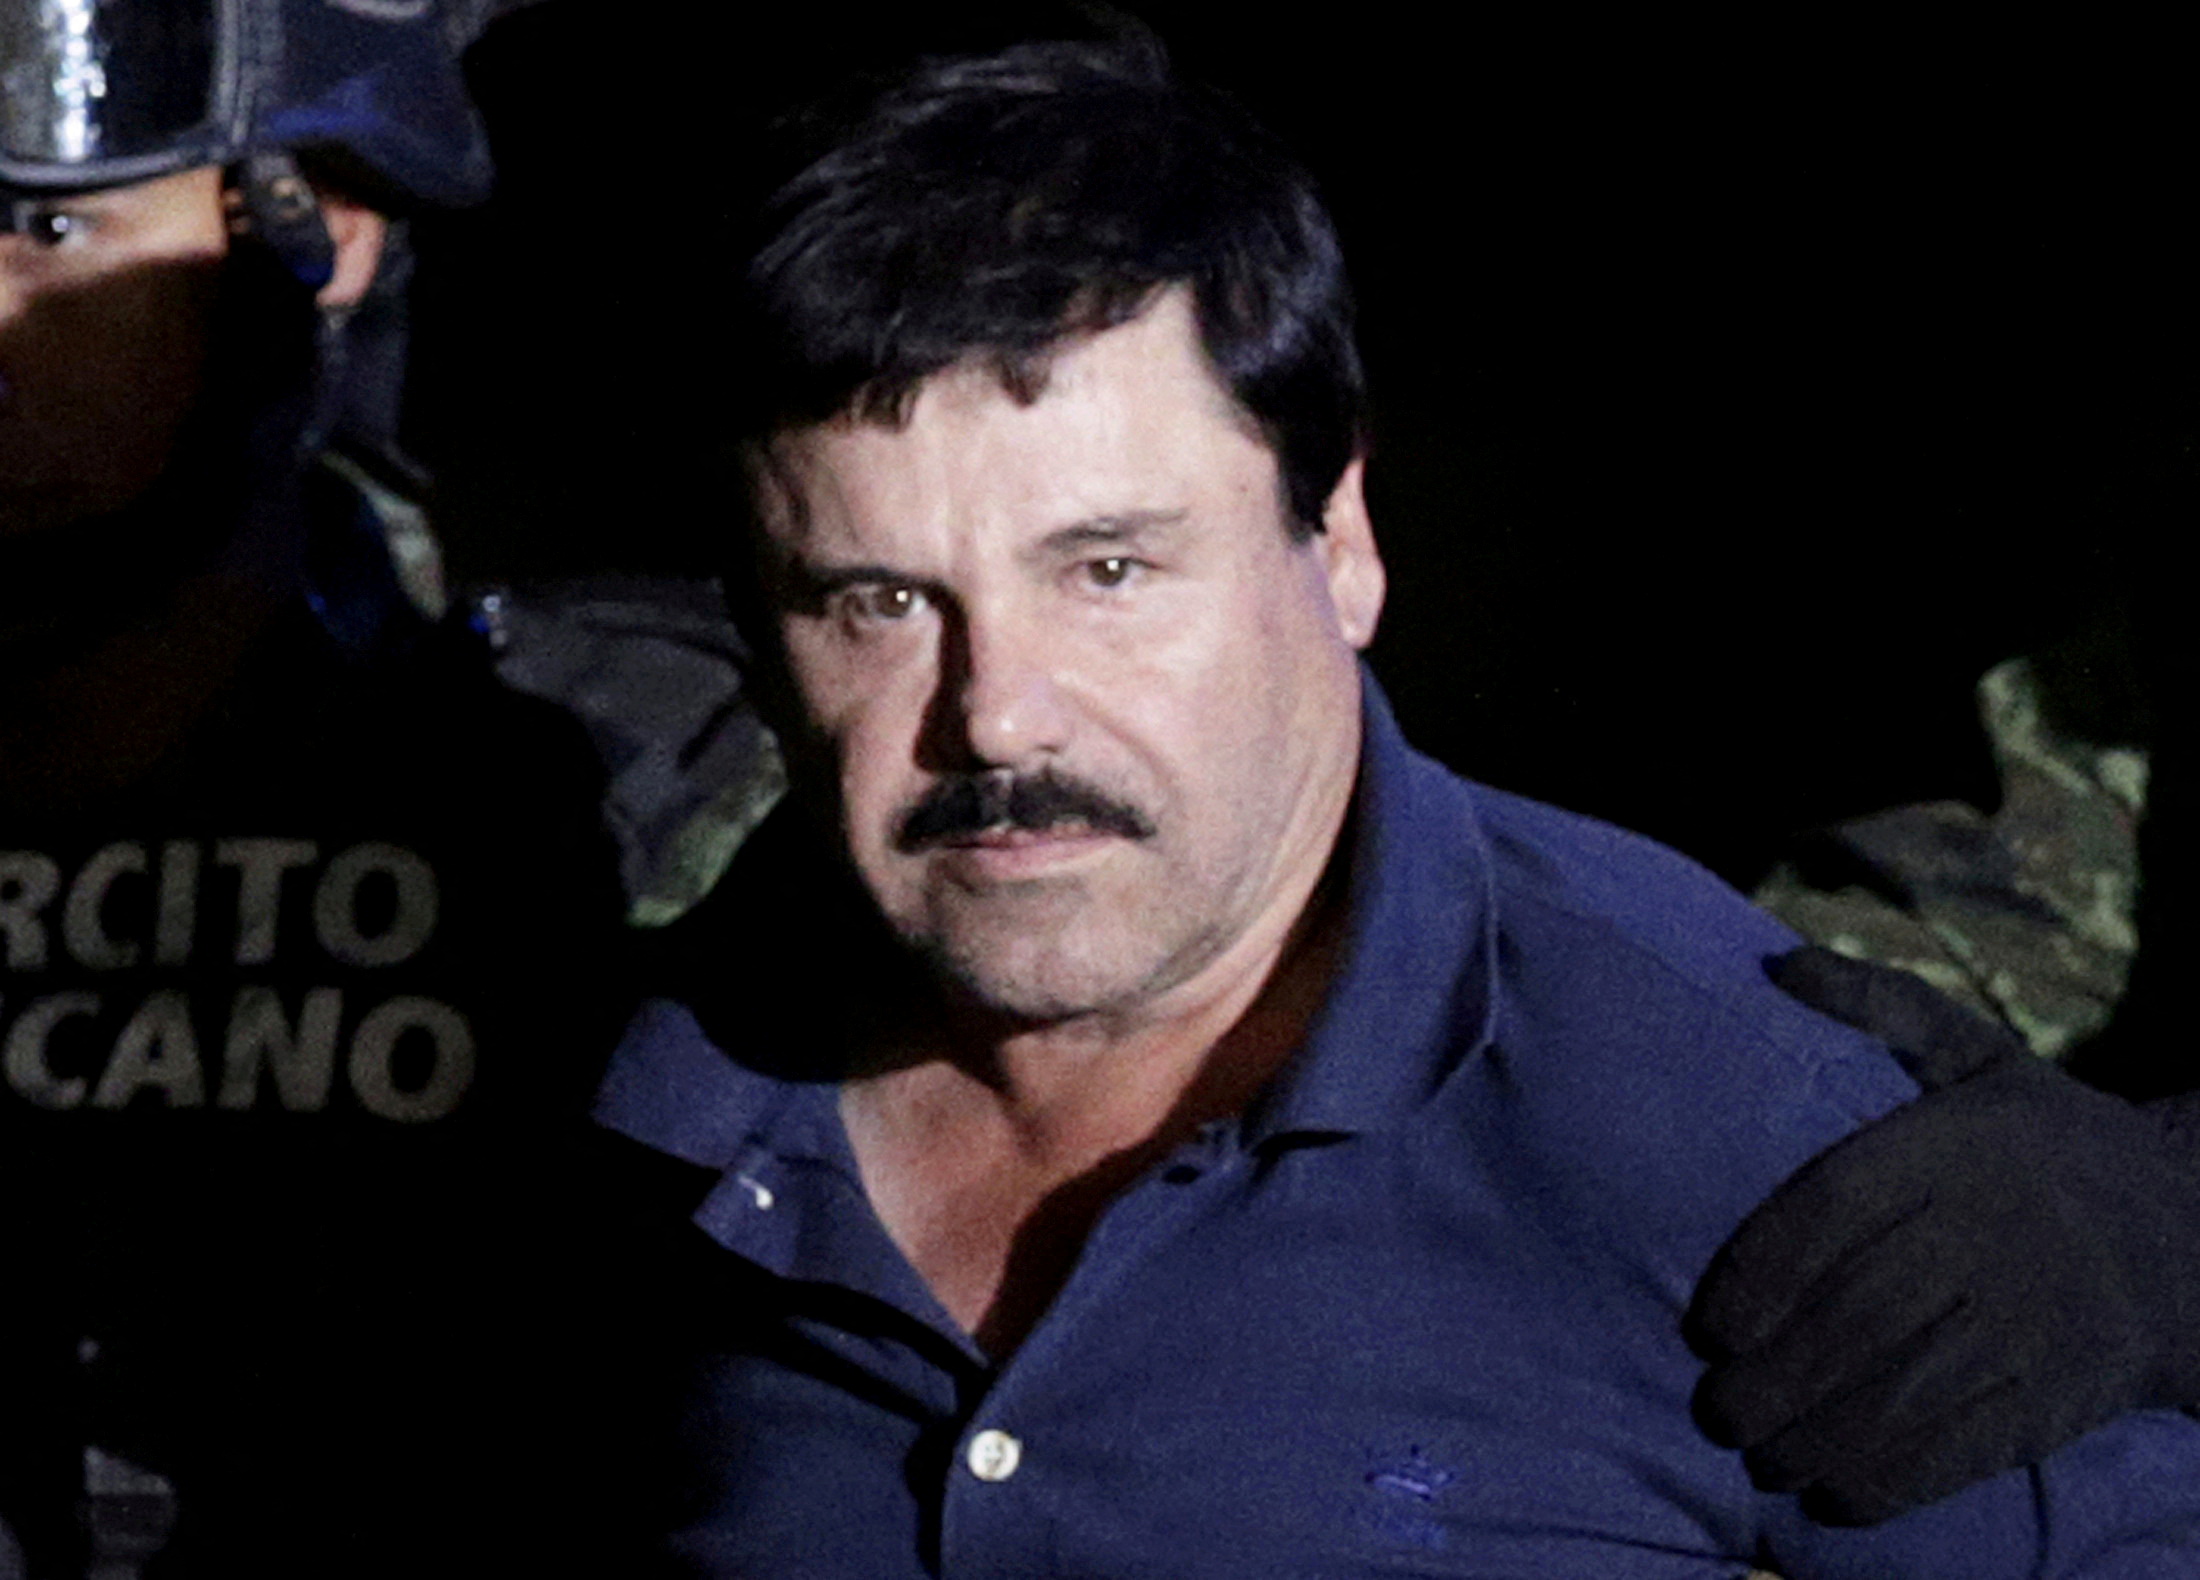 Guzmán Loera asked to be released arguing alleged irregularities (Photo: REUTERS/Henry Romero/File Photo)